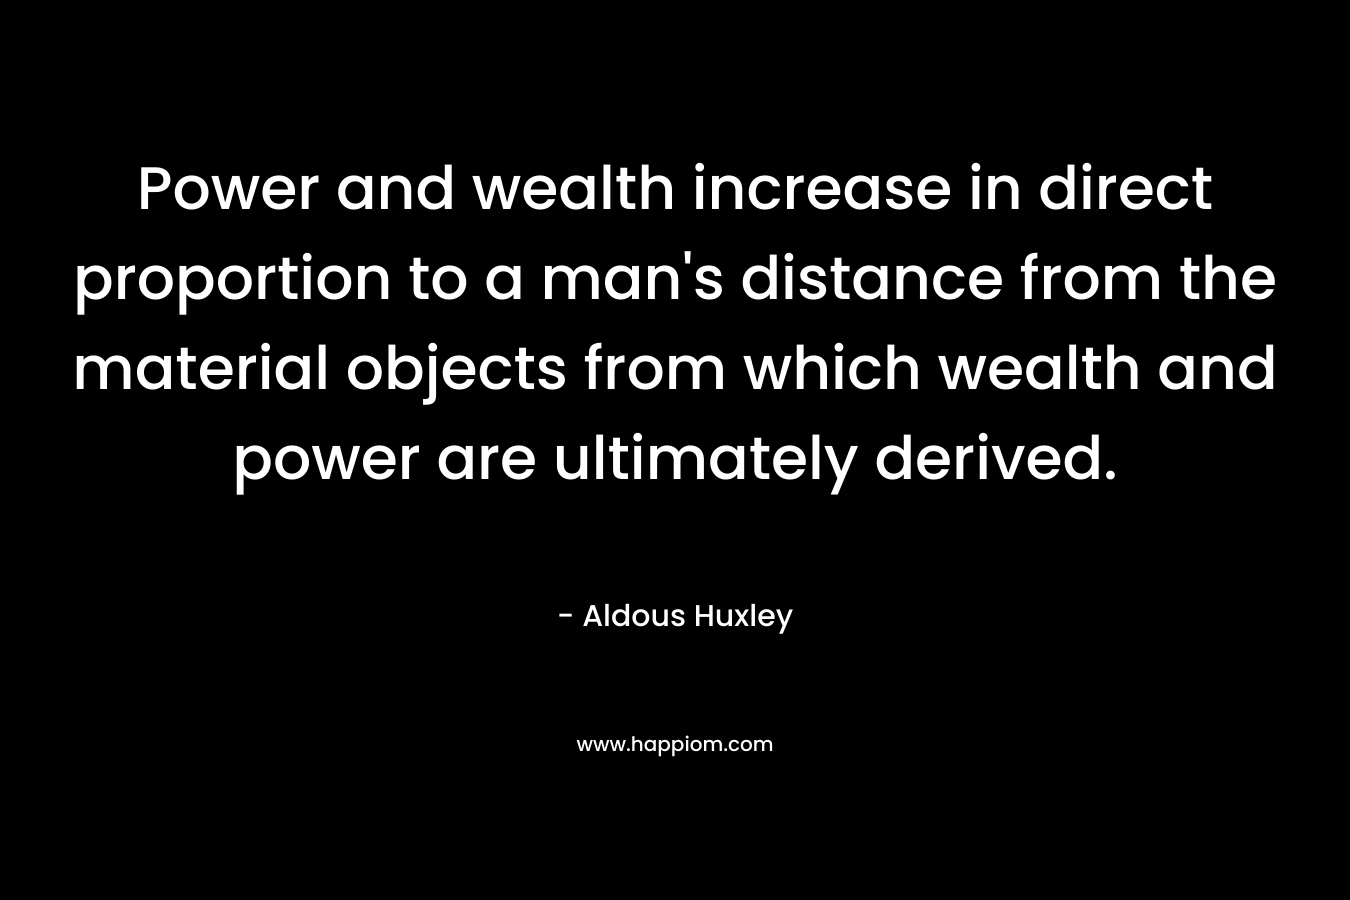 Power and wealth increase in direct proportion to a man’s distance from the material objects from which wealth and power are ultimately derived. – Aldous Huxley